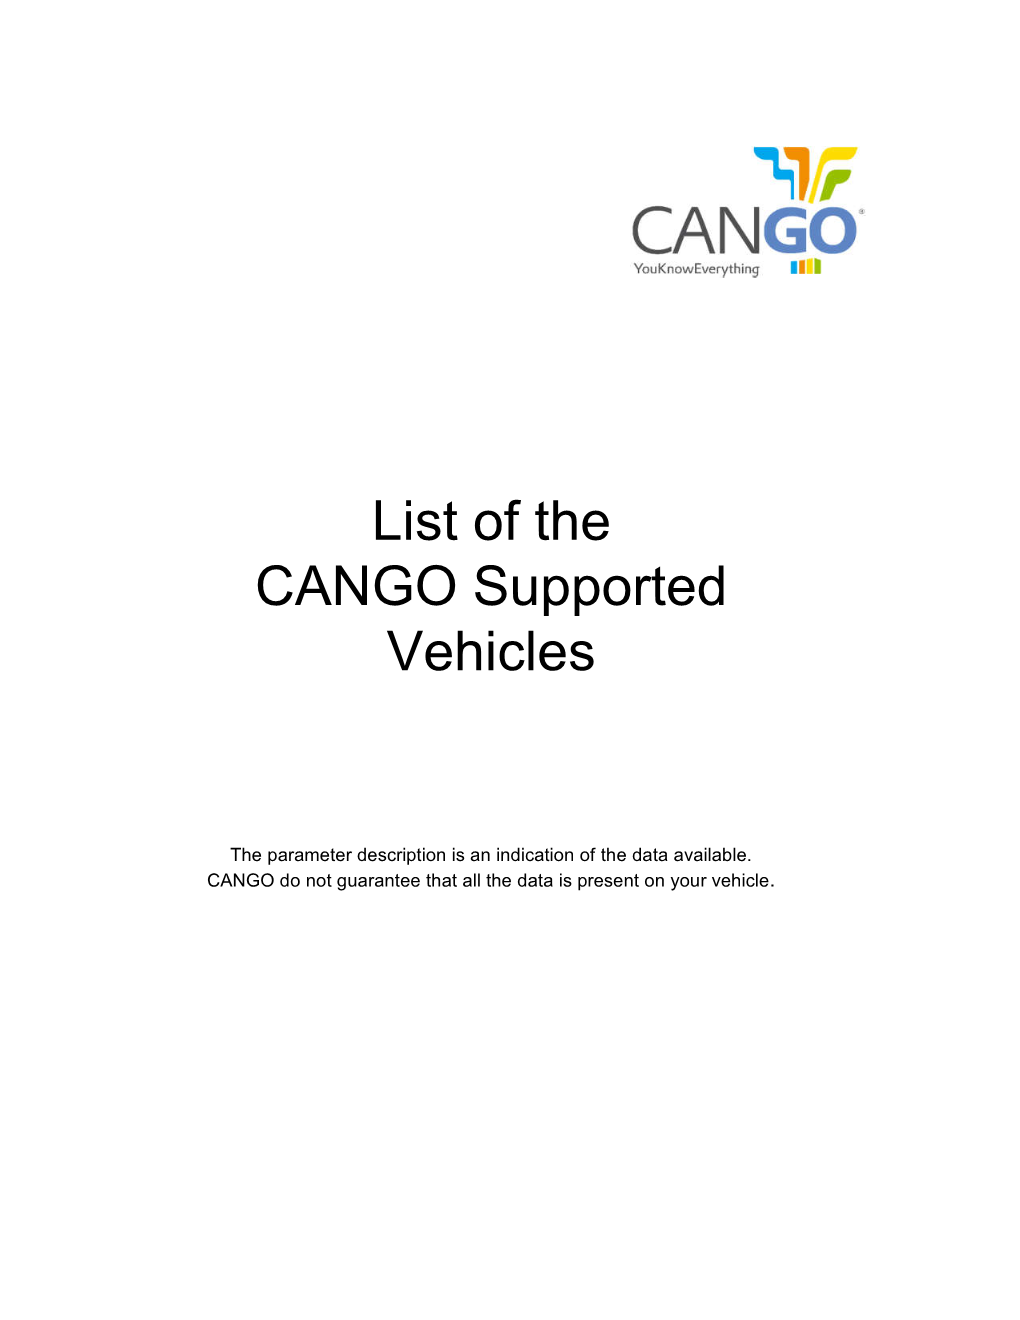 List of the CANGO Supported Vehicles